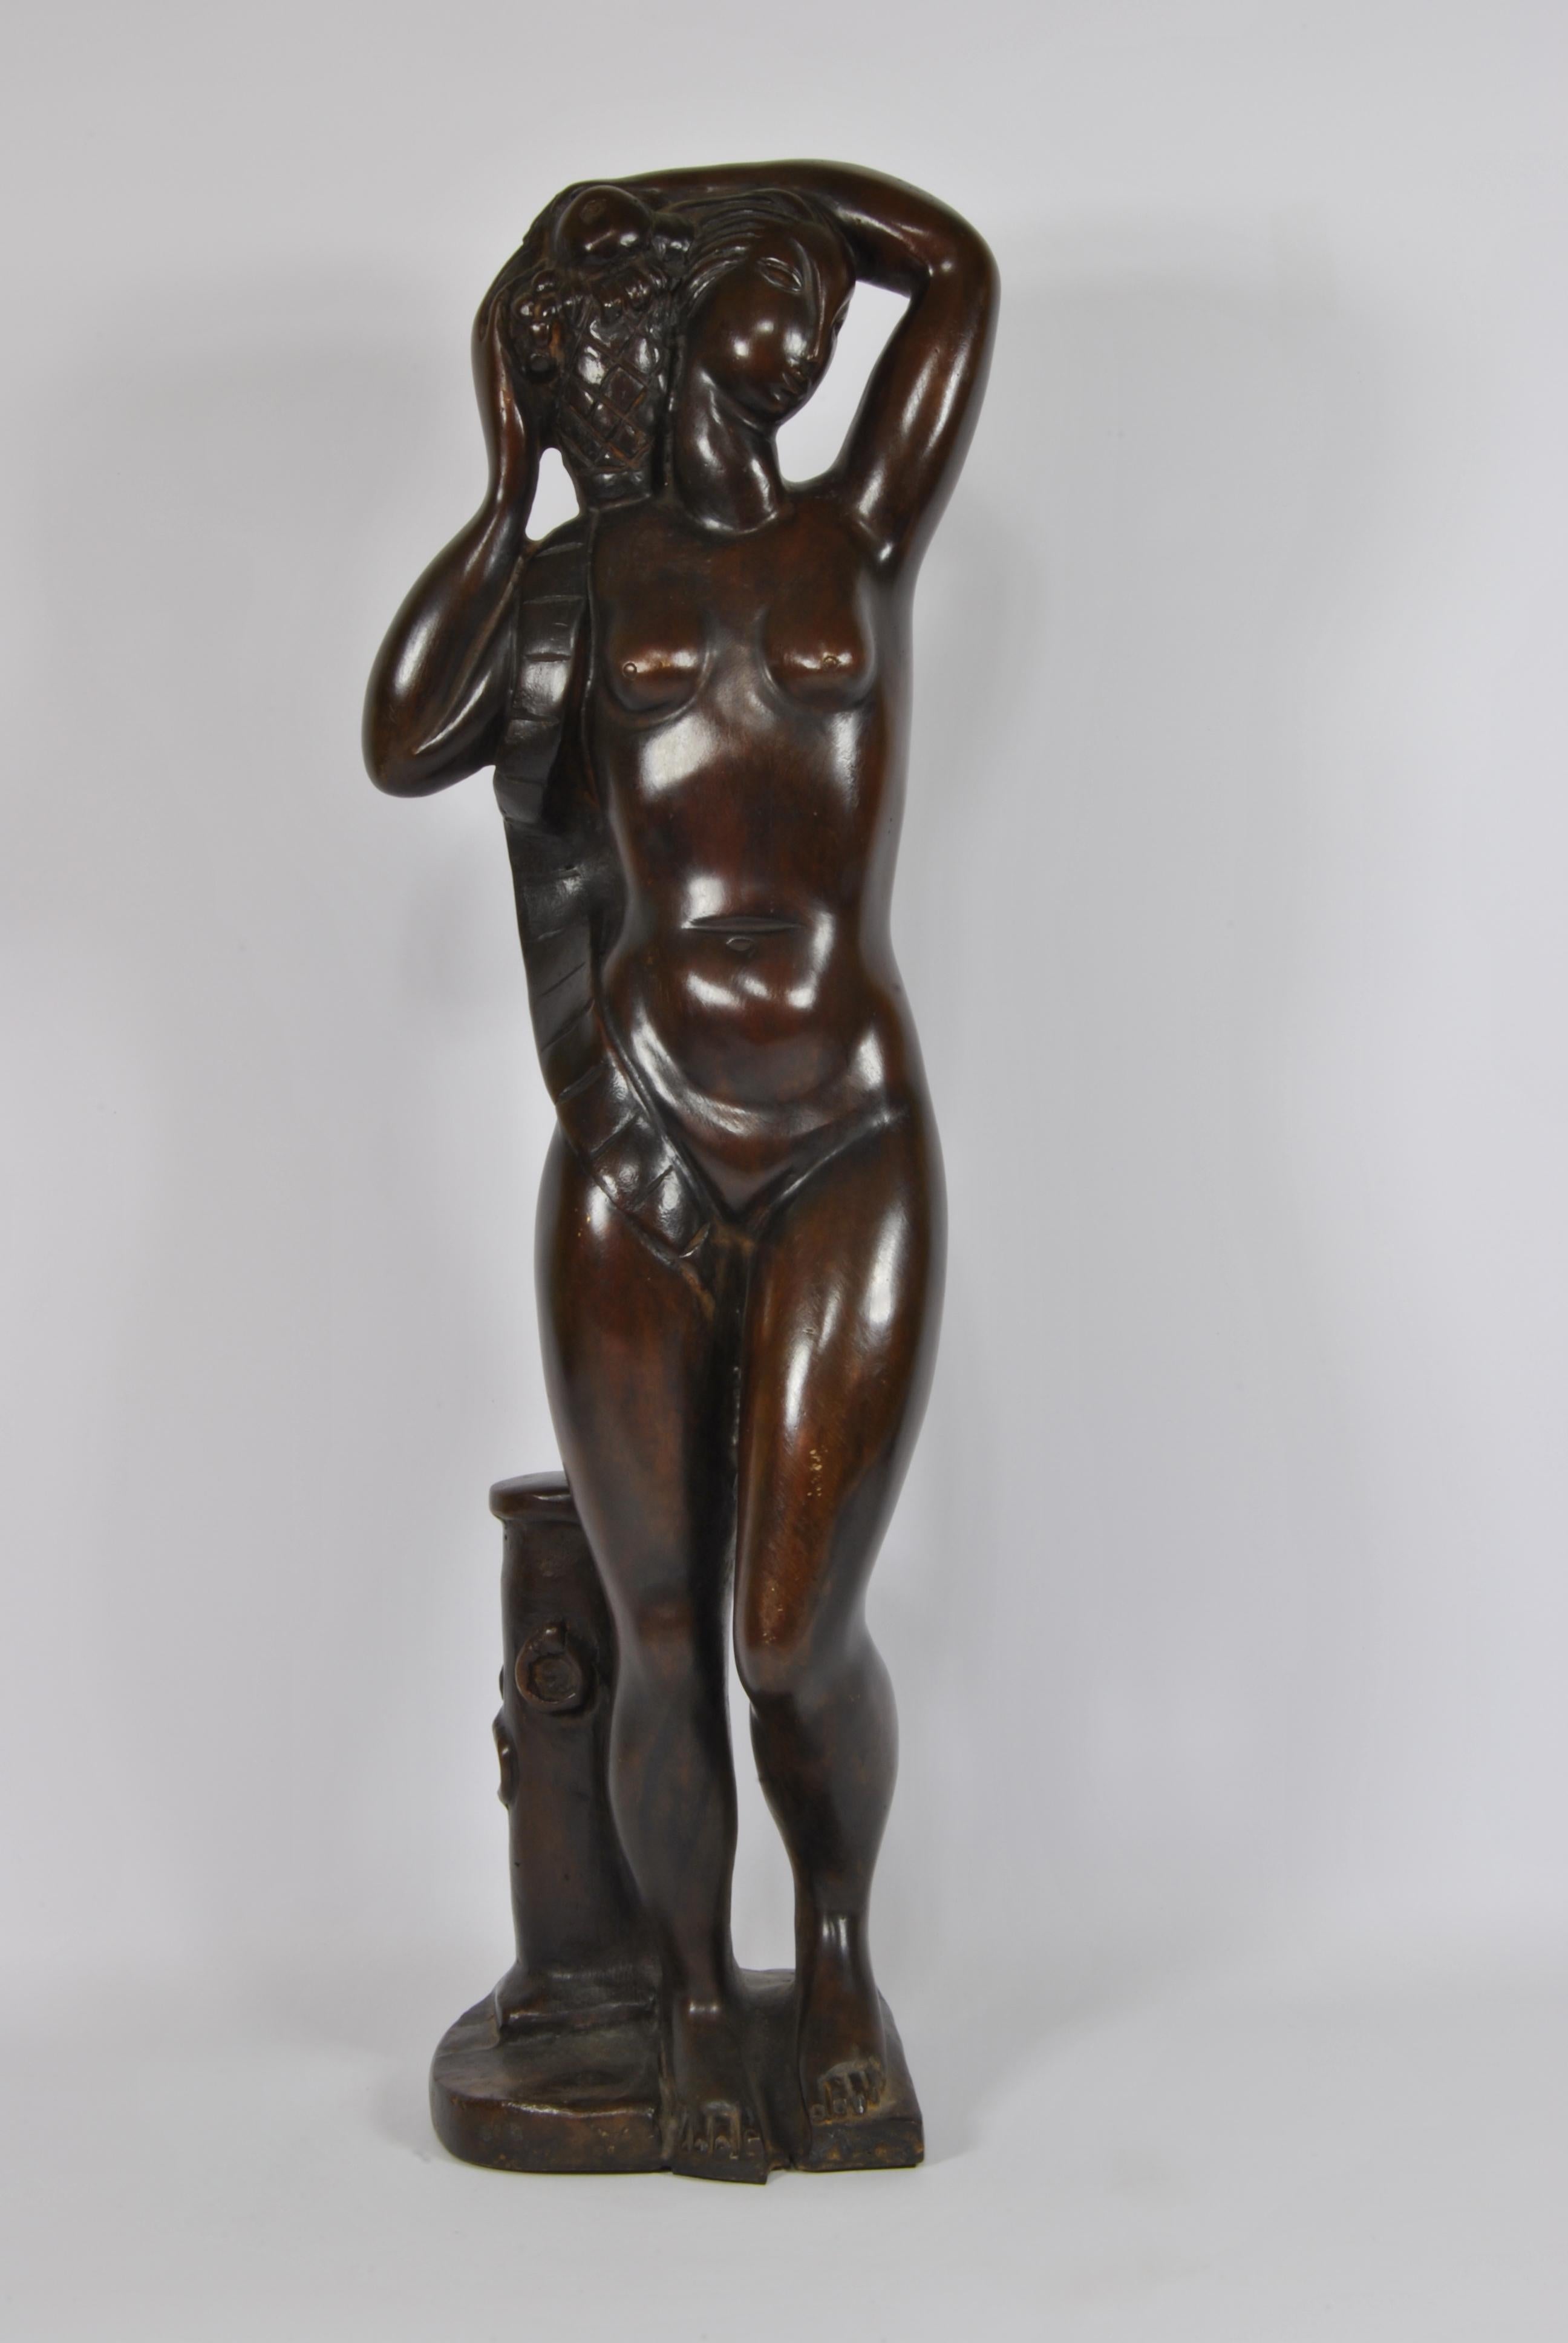 Art Deco sculpture entirely in bronze, signed by the sculptor Celano France 1940.
The sculpture bears the engraved signature 